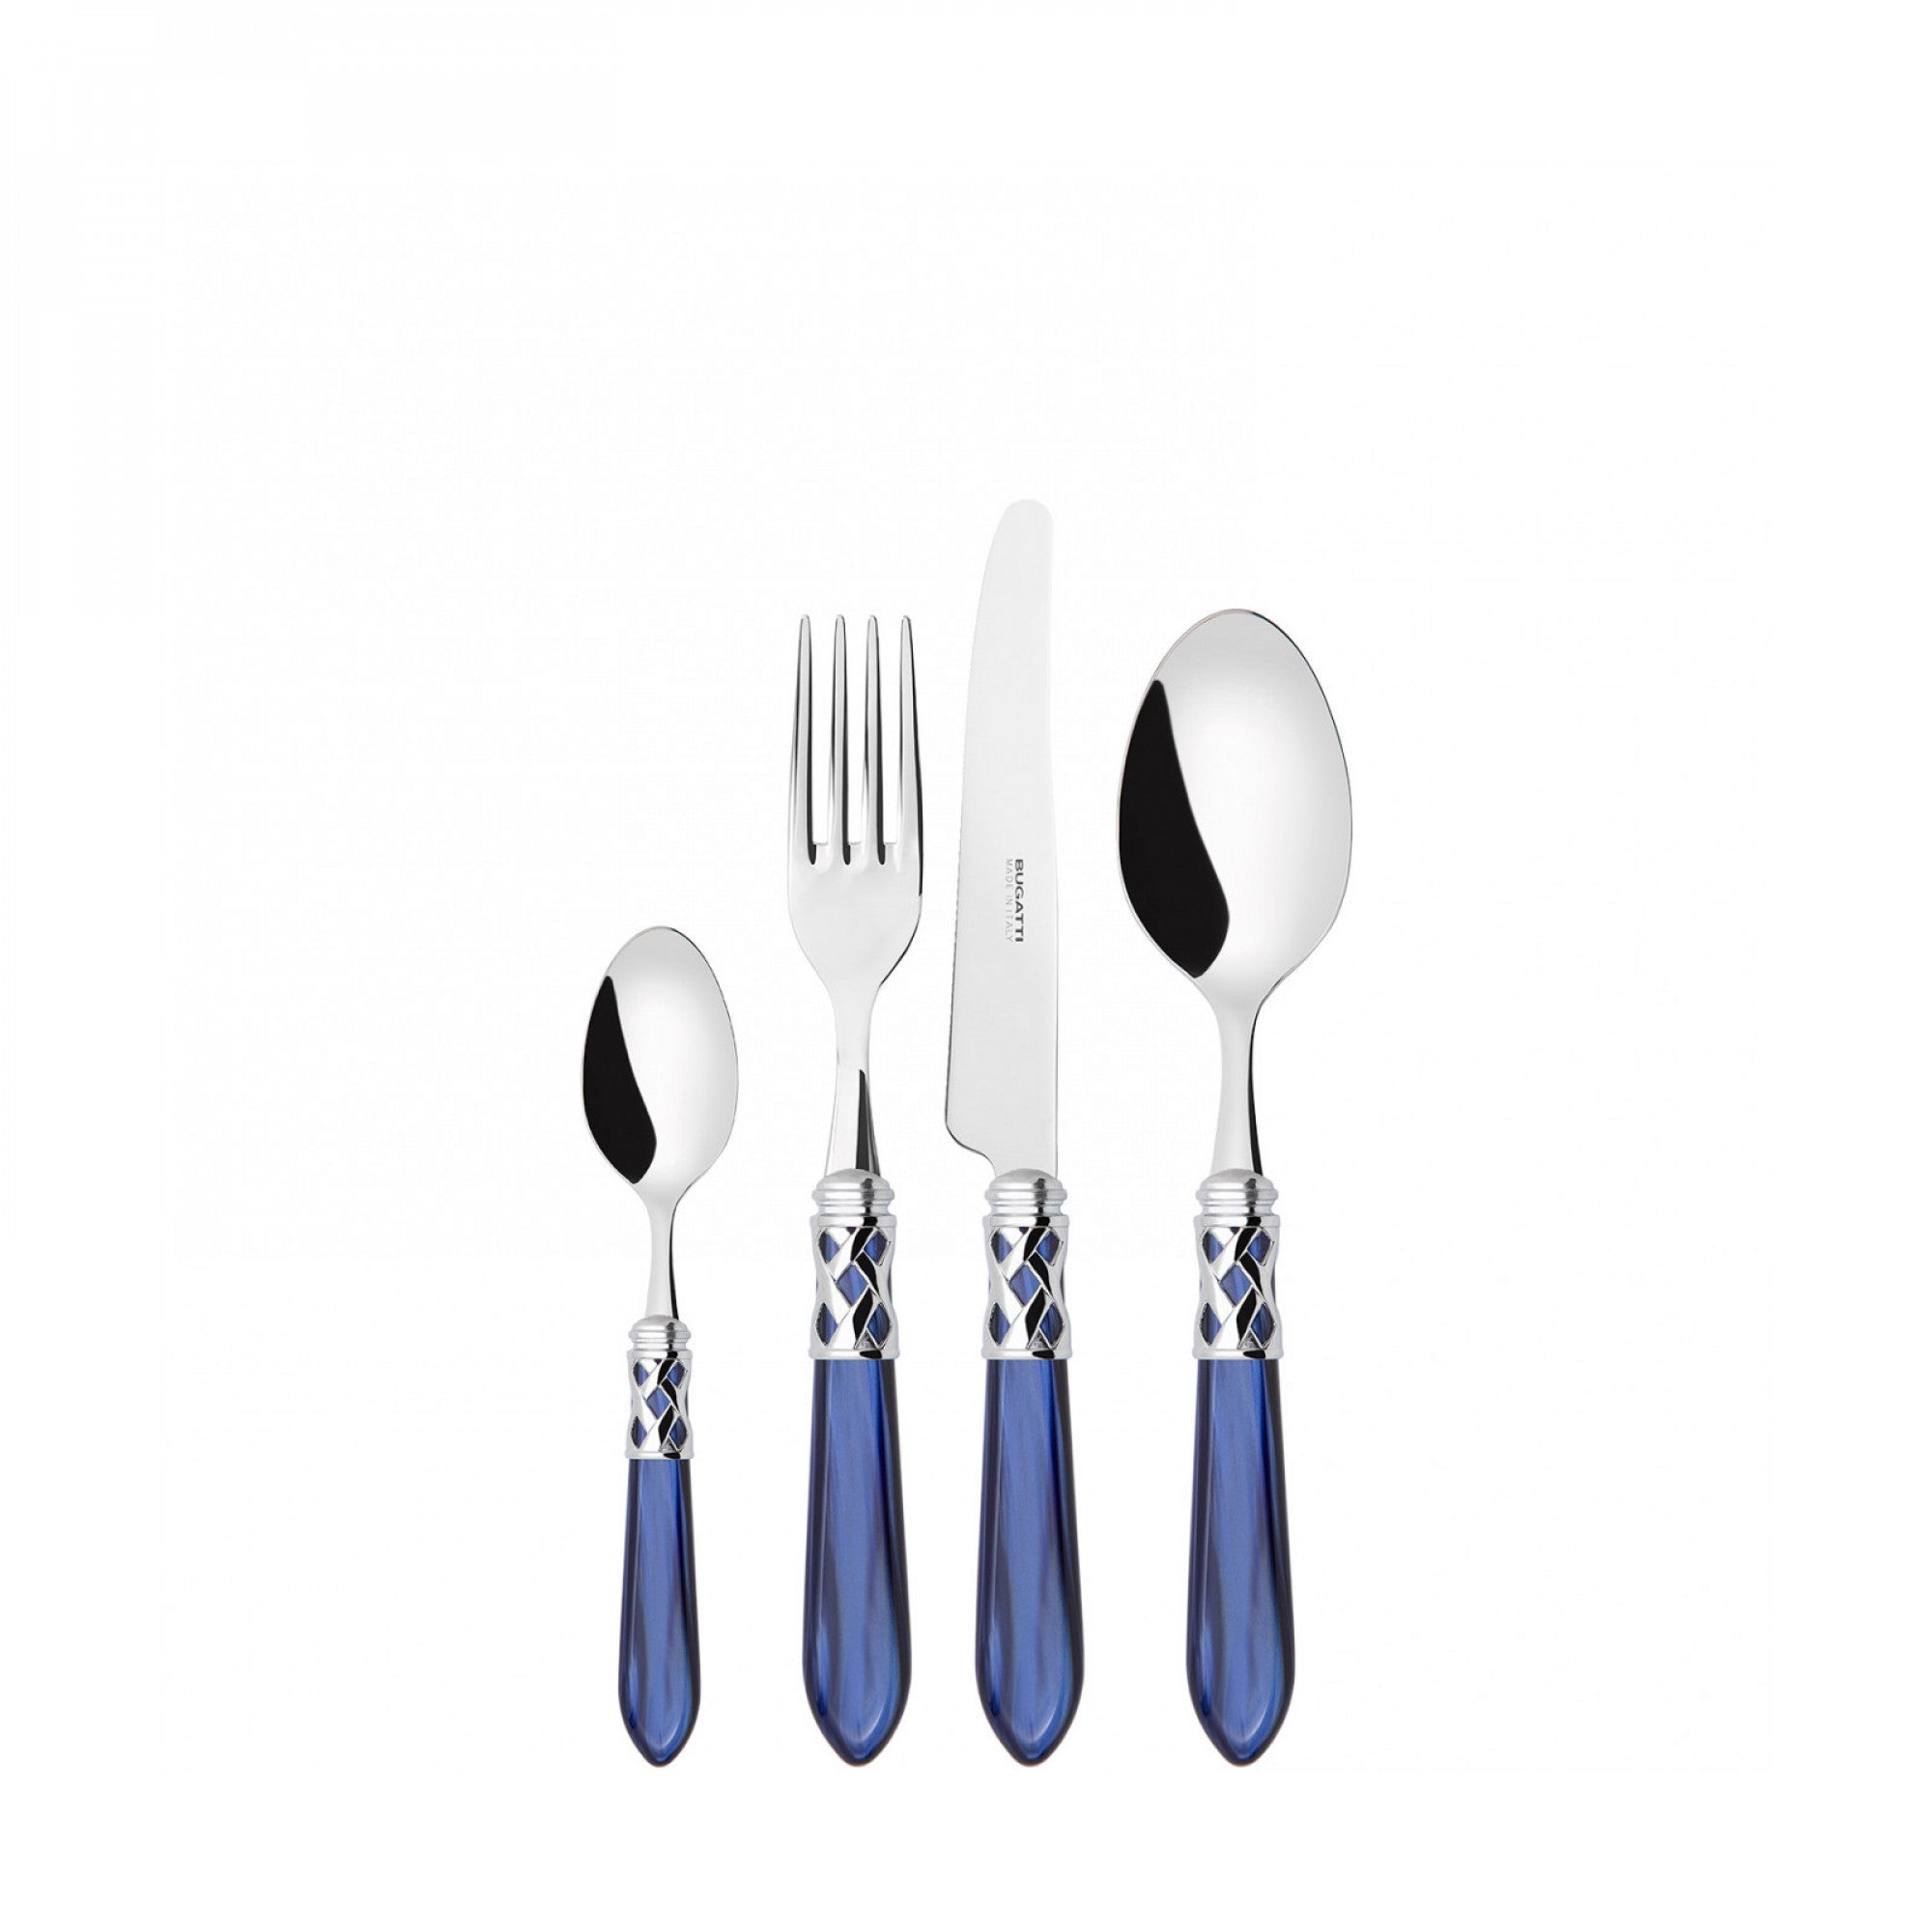 BUGATTI, Aladdin, 24-piece cutlery set in 18/10 stainless steel, chromed ring and mother-of-pearl effect handle, packed in gallery box